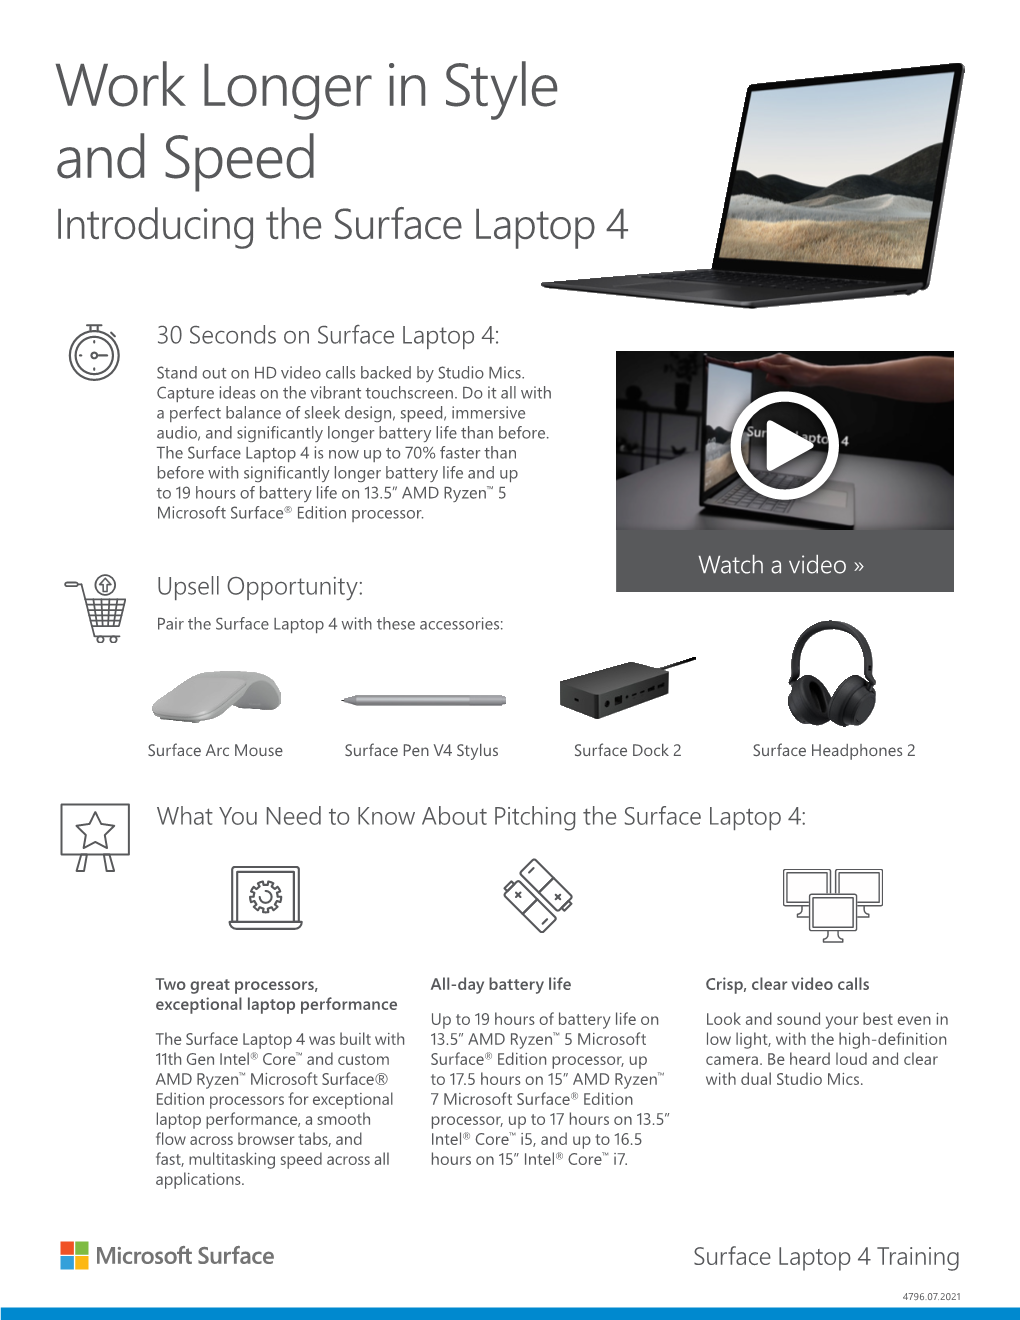 Work Longer in Style and Speed Introducing the Surface Laptop 4